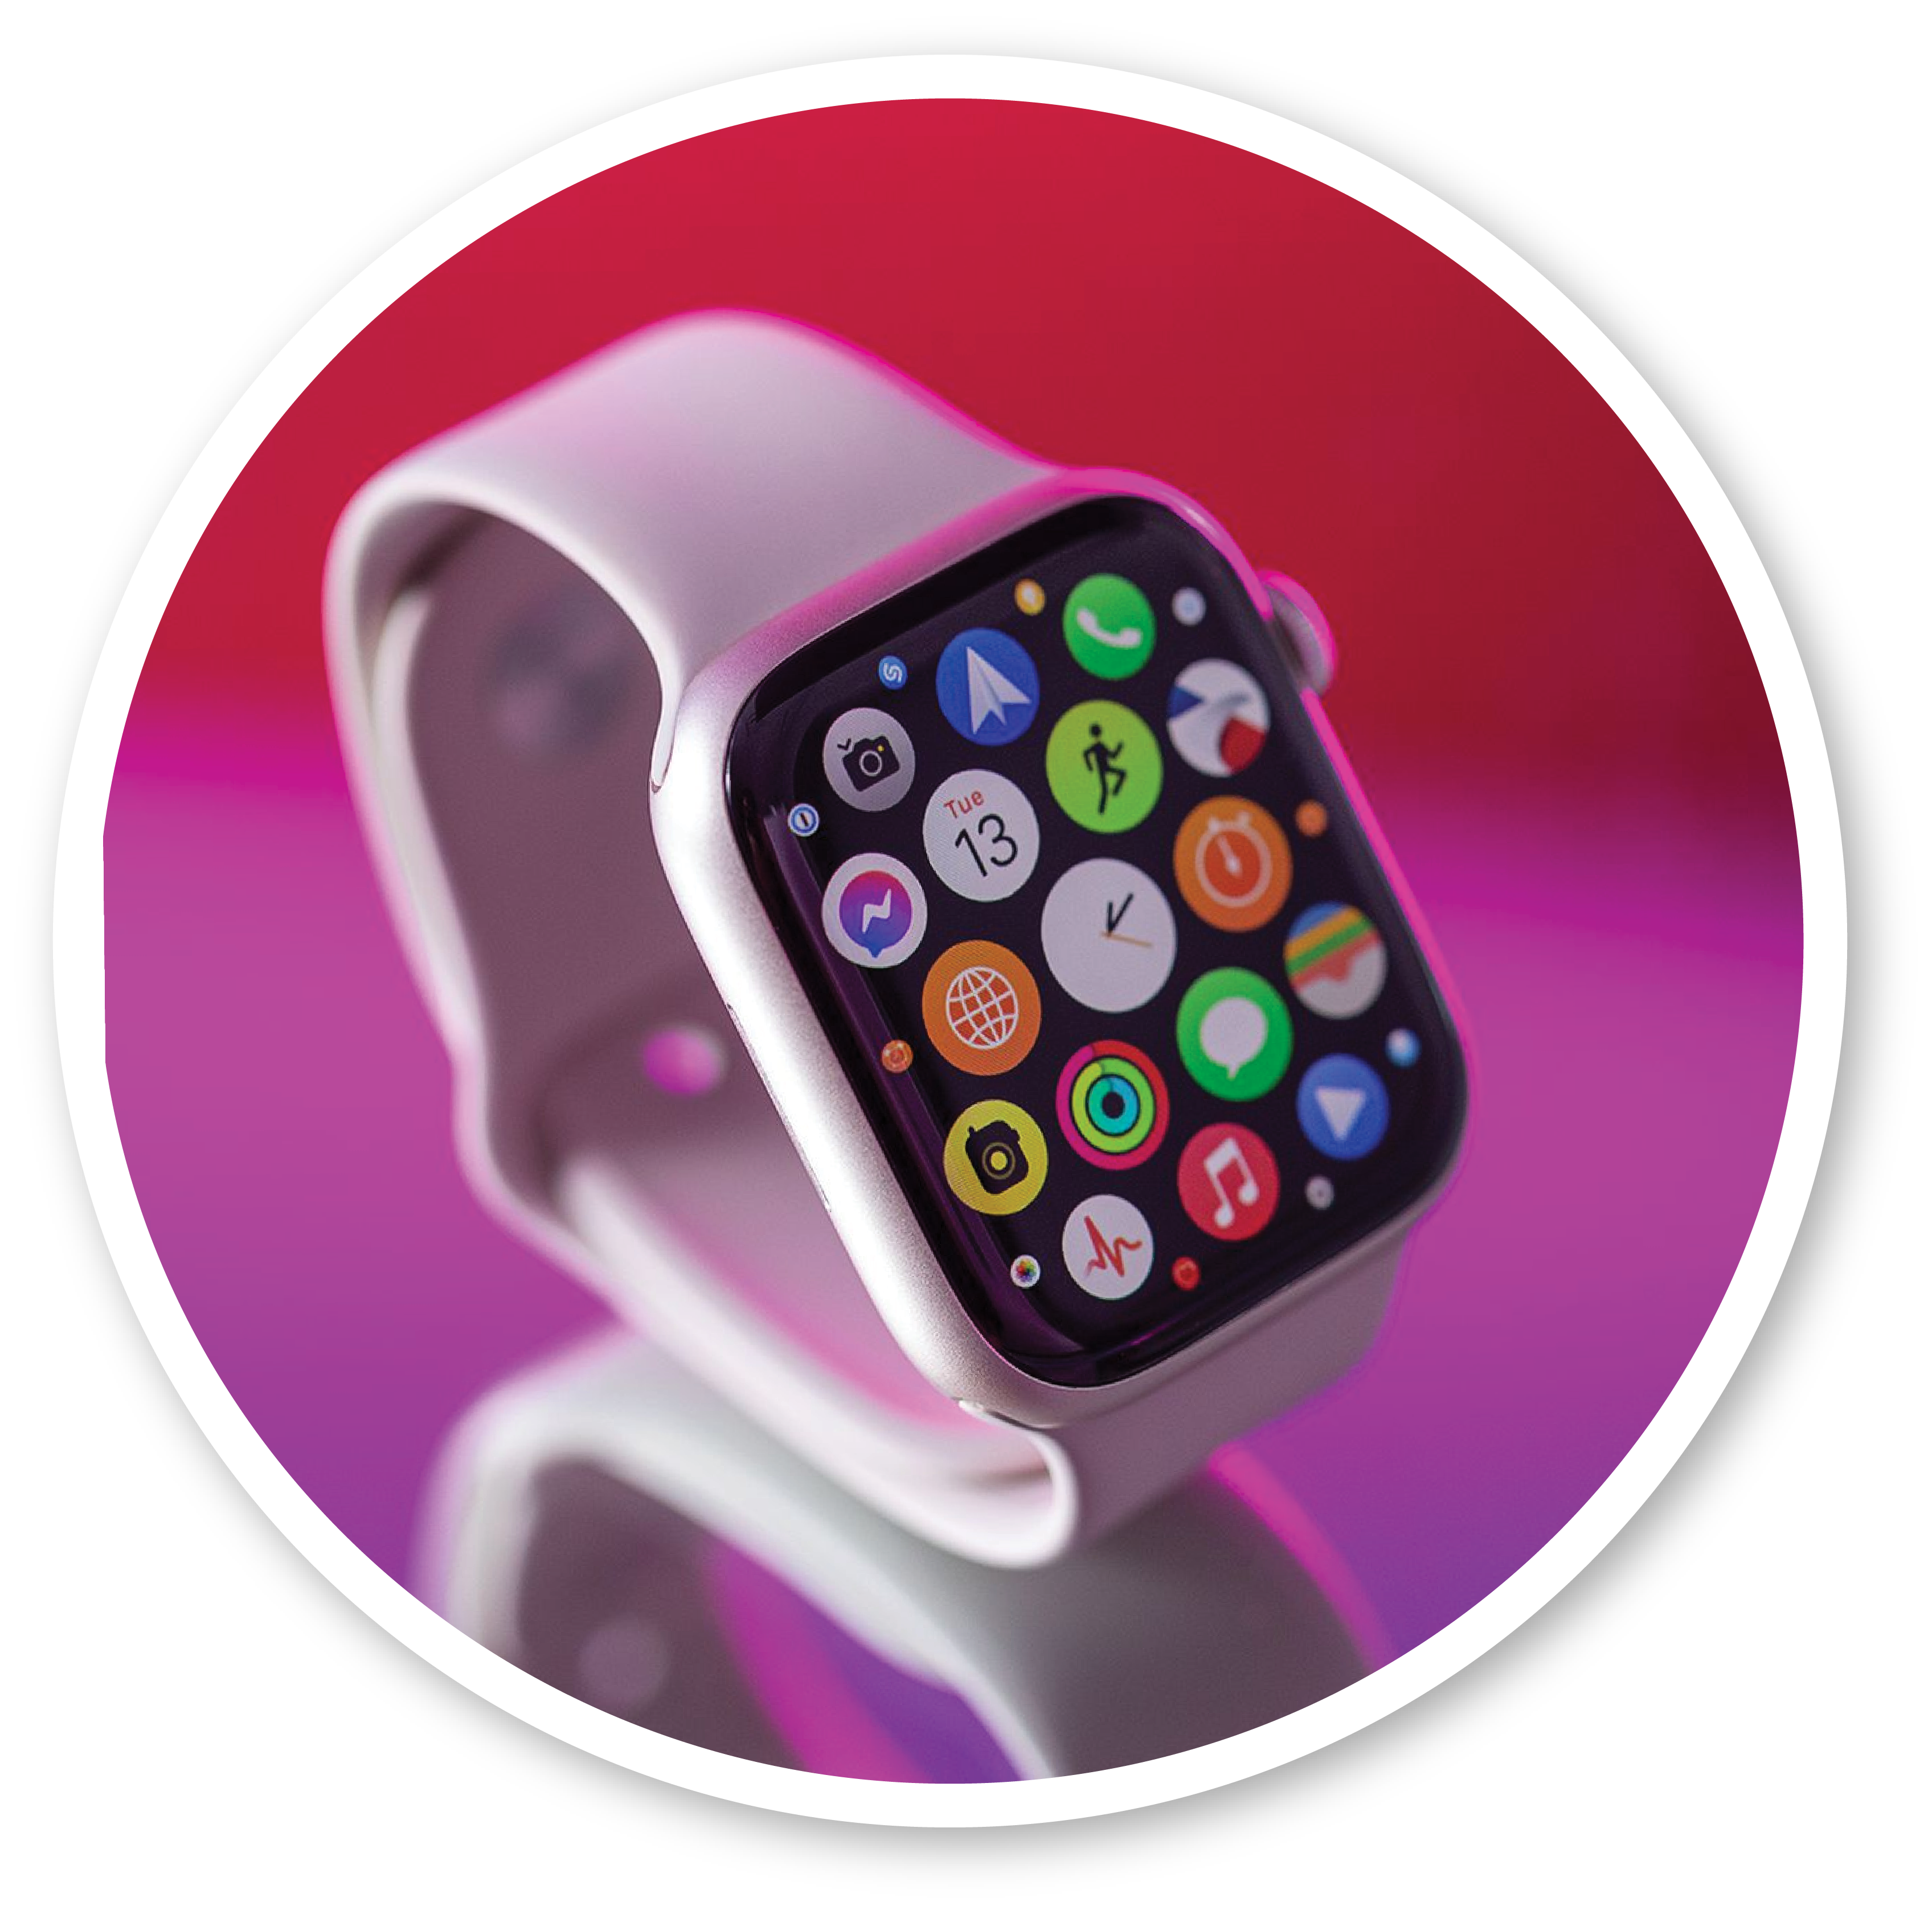 2nd Prize - Apple Watch